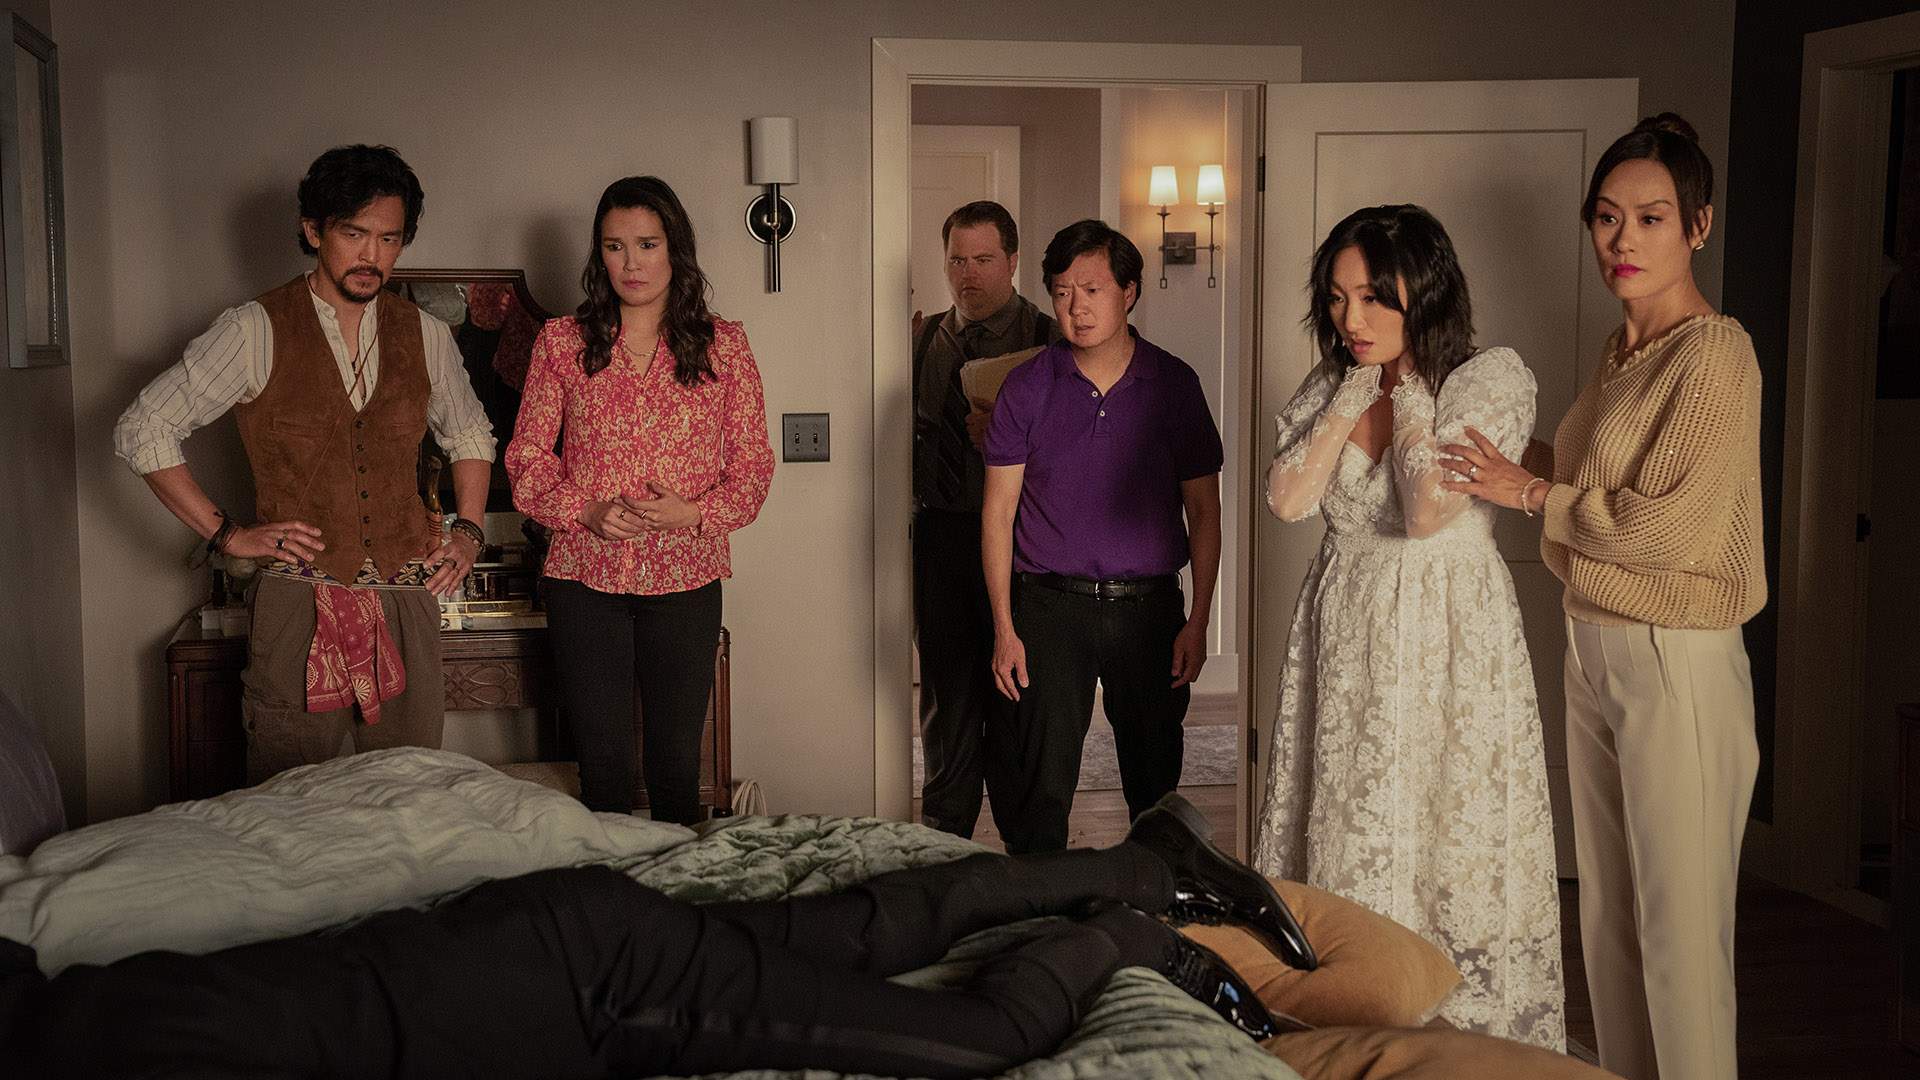 Genre-Bending Whodunnit 'The Afterparty' Is Still One of Streaming's Funniest Murder-Mysteries in Season Two